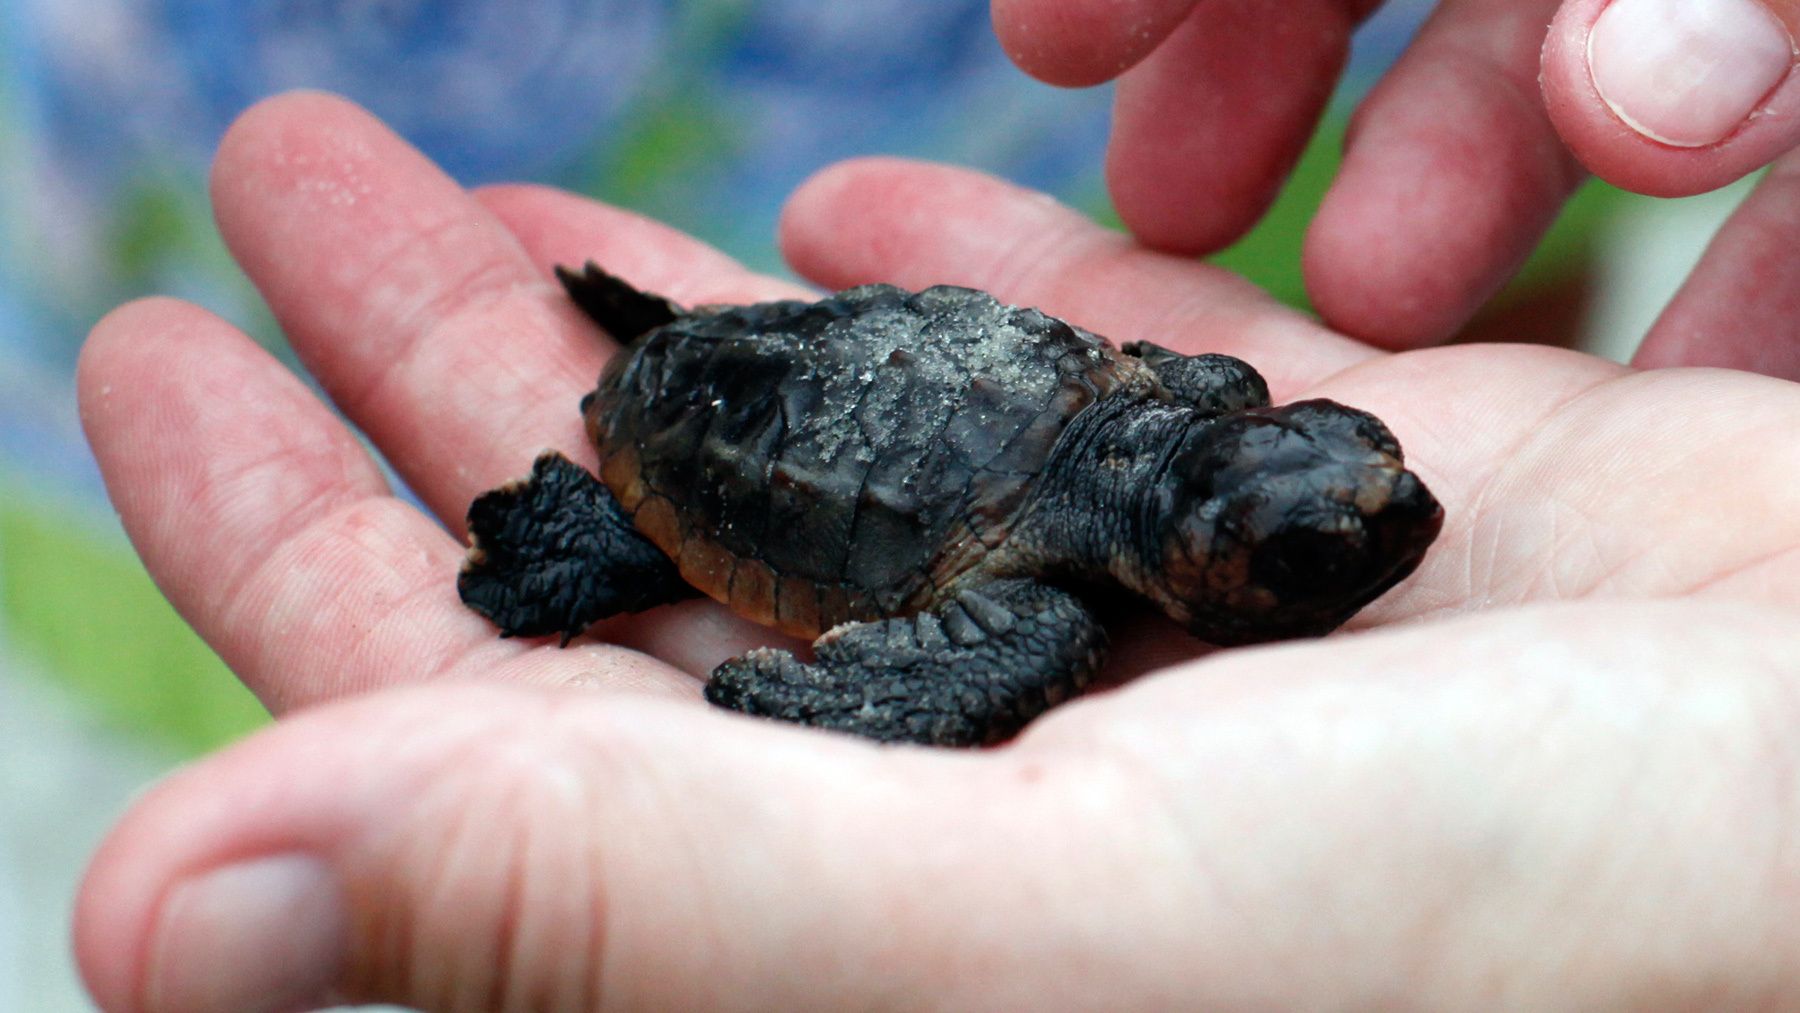 A volunteer looks at an injured Loggerhead sea turtle hatchling after an inventory on Litchfield Beach, South Carolina August 17, 2012.REUTERS/Randall Hill